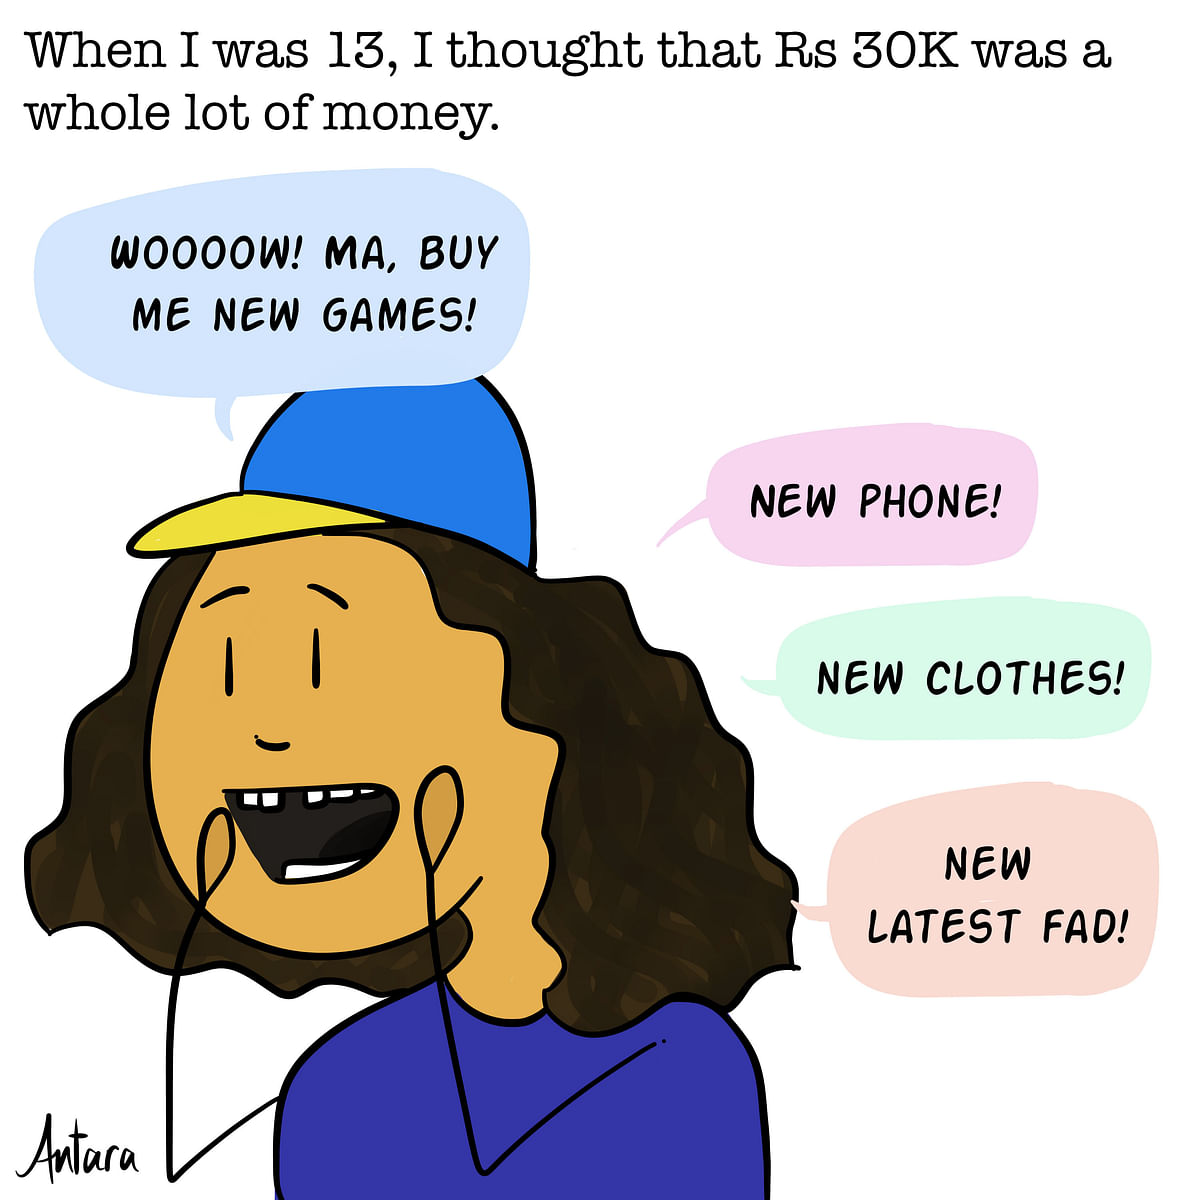 ‘Why did I ever think that Rs 30,000 was enough as a kid?’